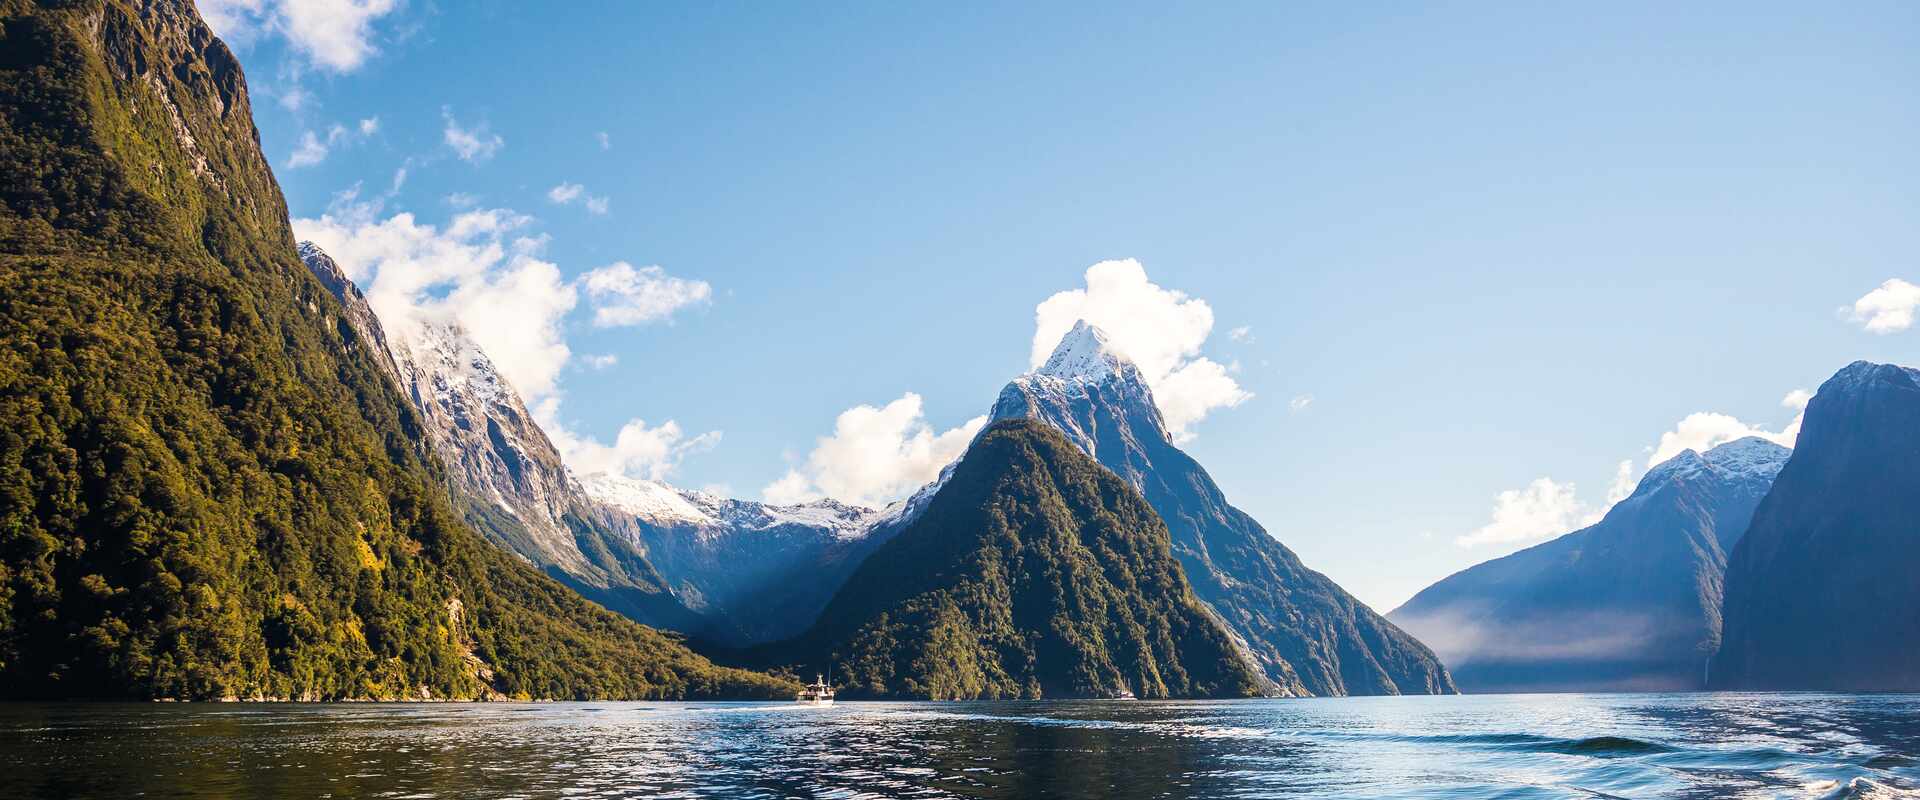 Looking across the water to beautiful Milford Sound